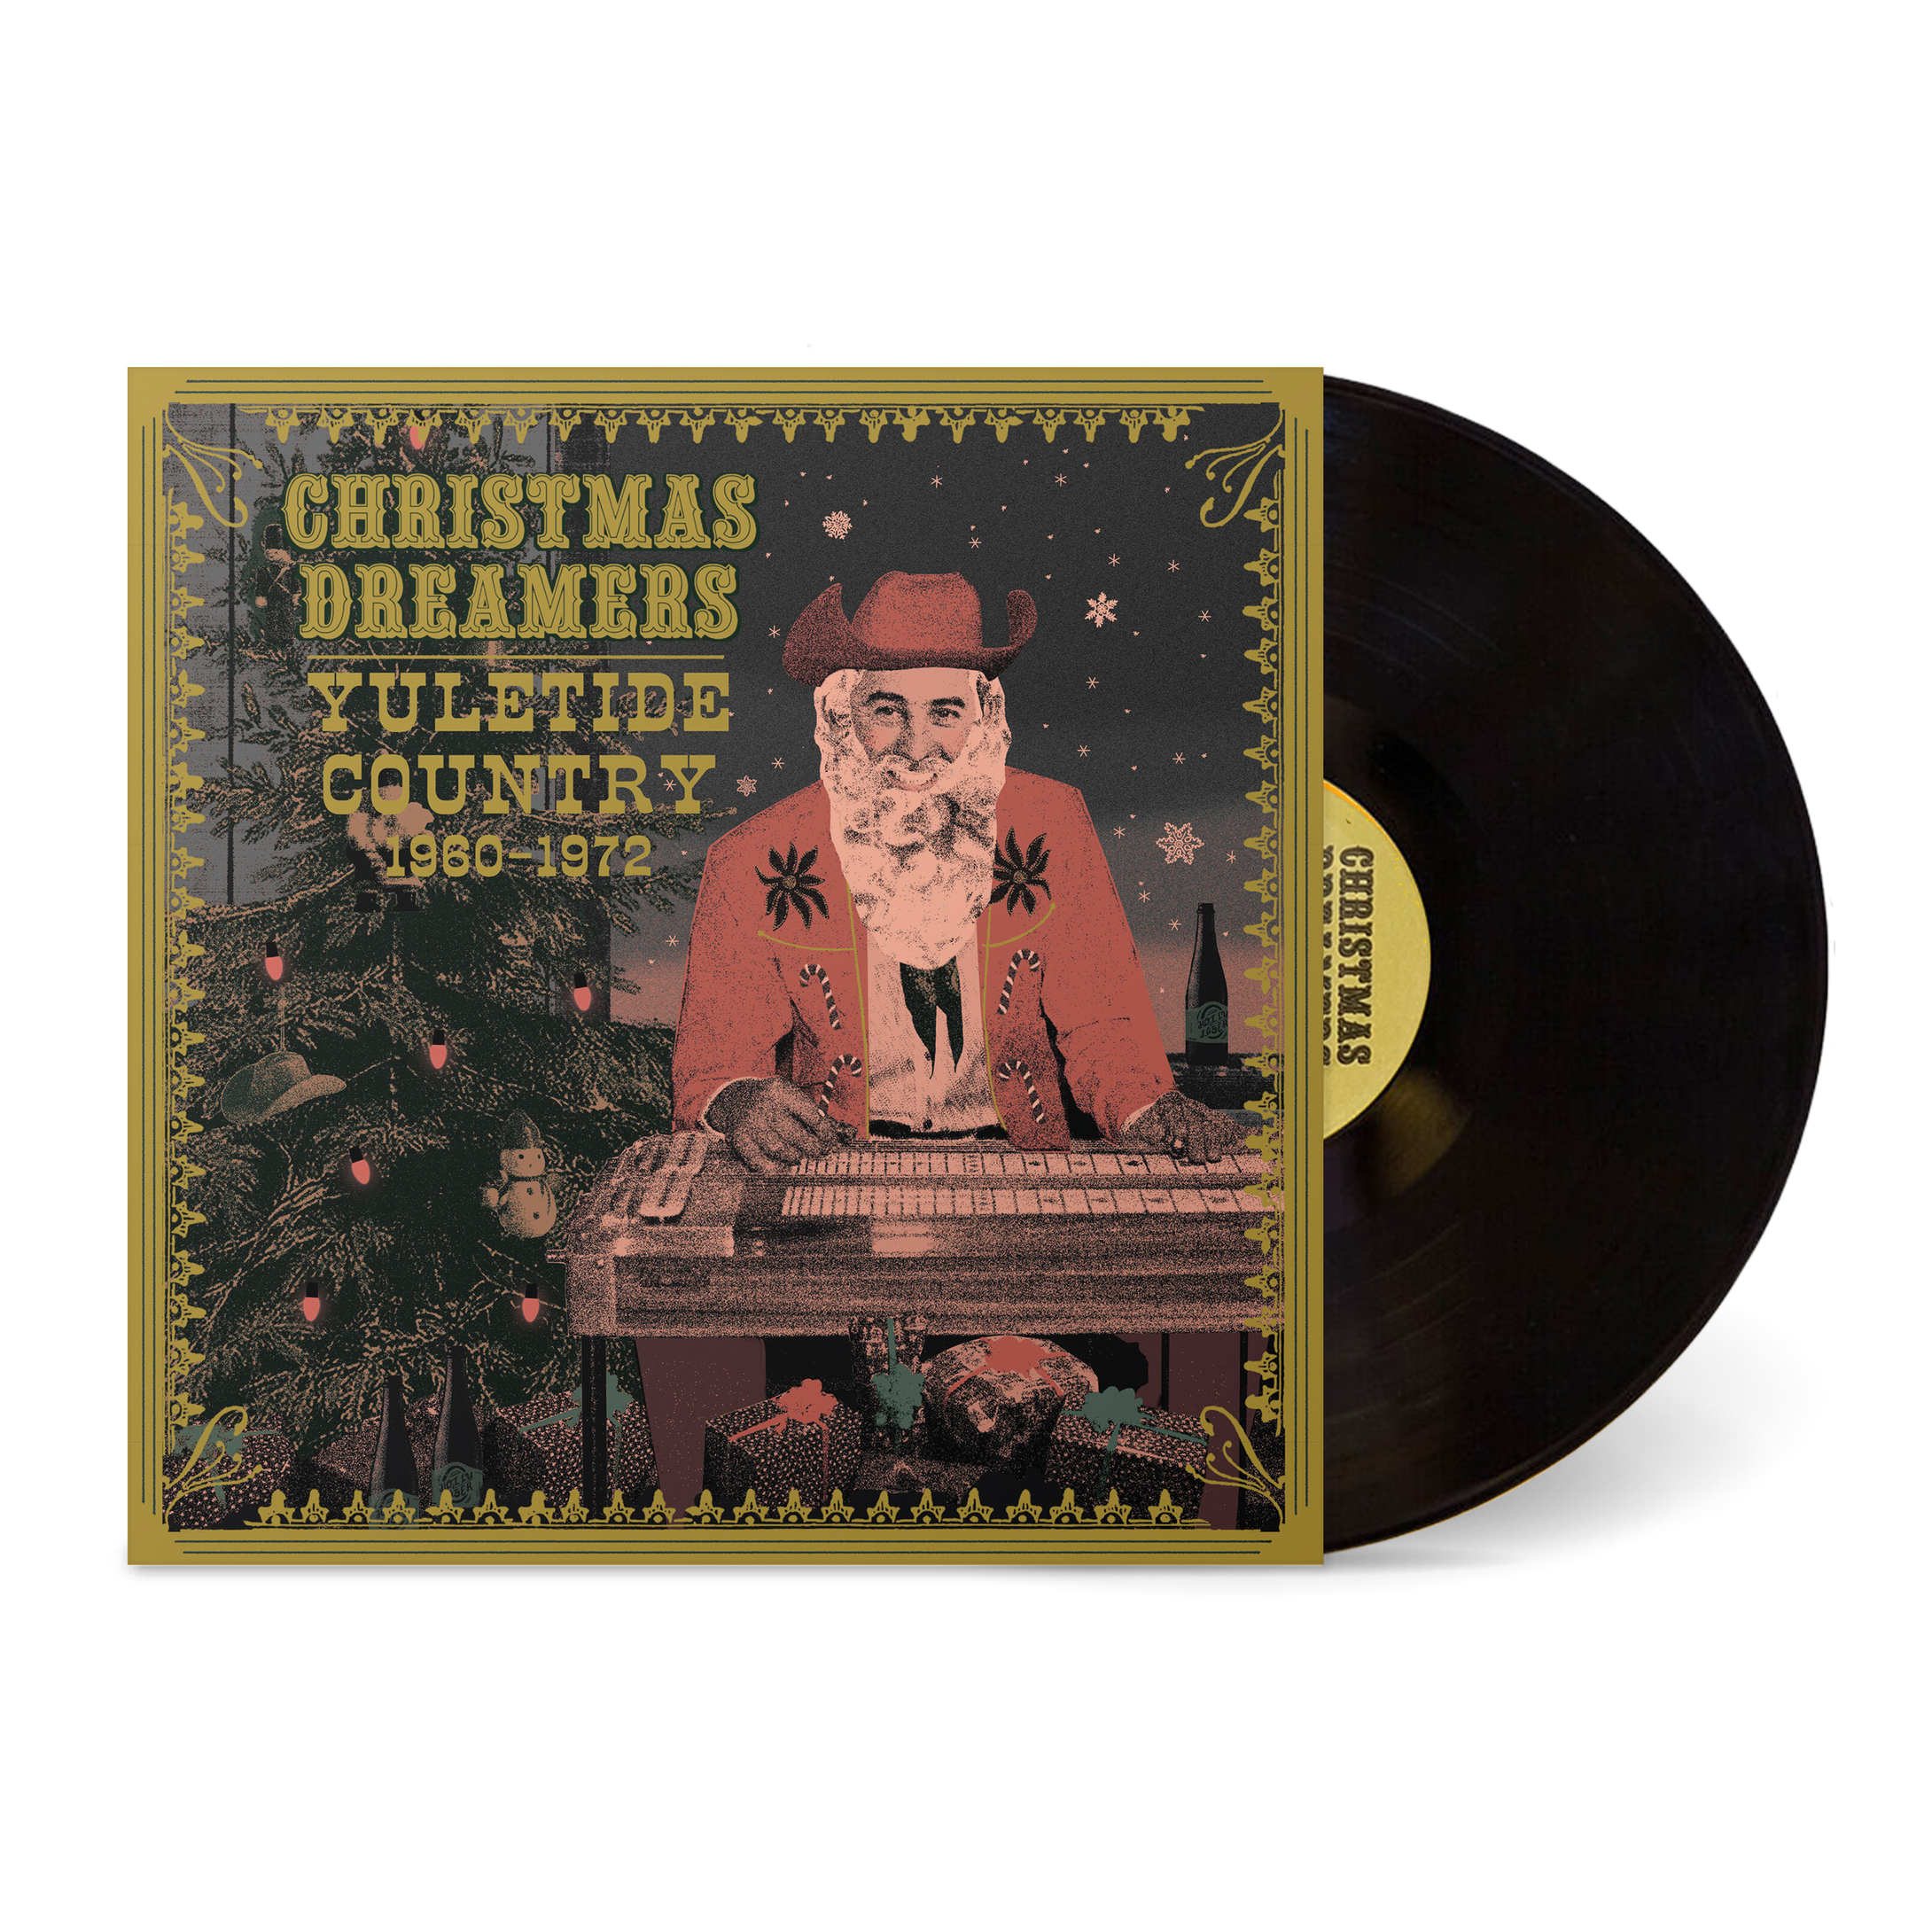 Christmas Dreamers: Yuletide Country (1960-1972)